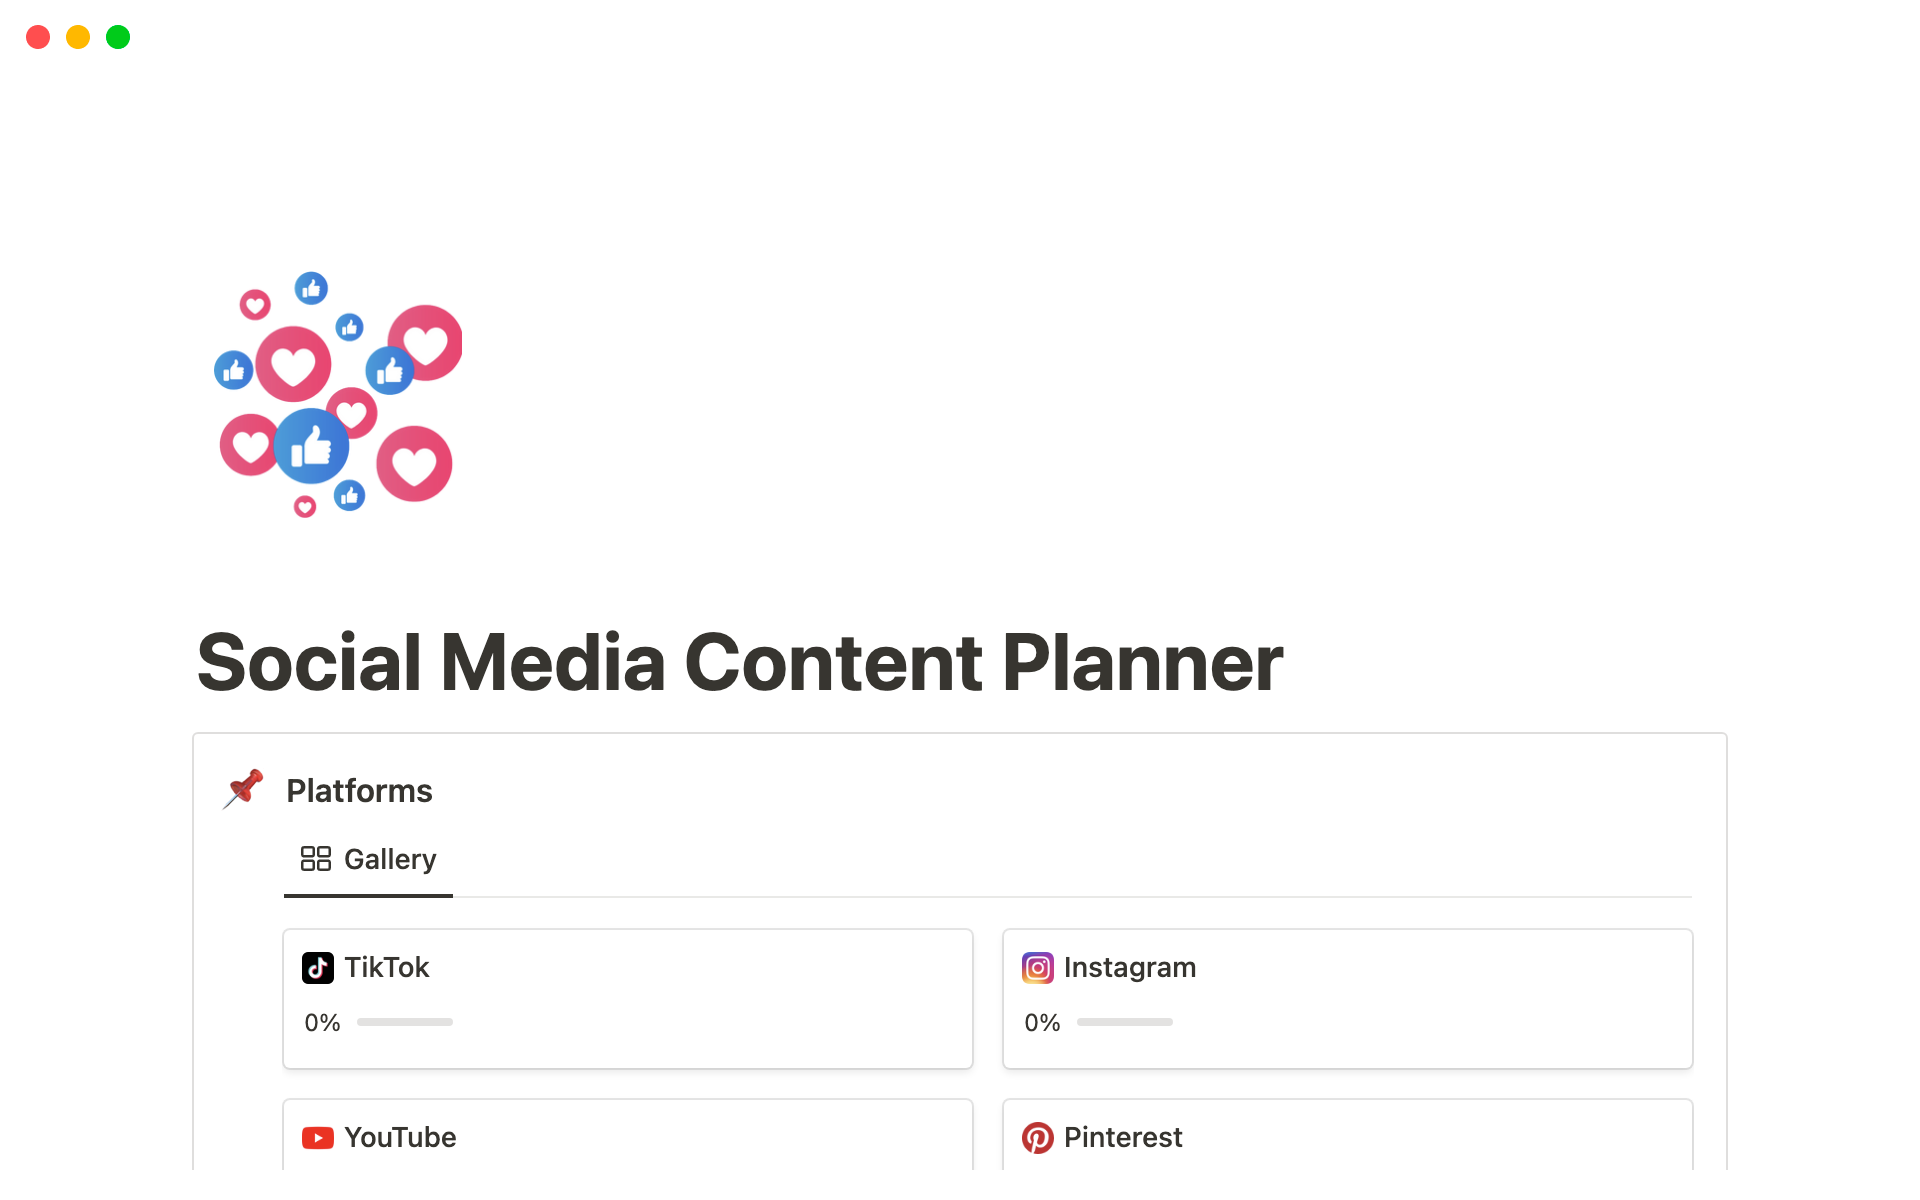 The Social Media Content Planner lets you easily plan and manage your social media content across 8 different platforms (you can easily add more platforms if you want).